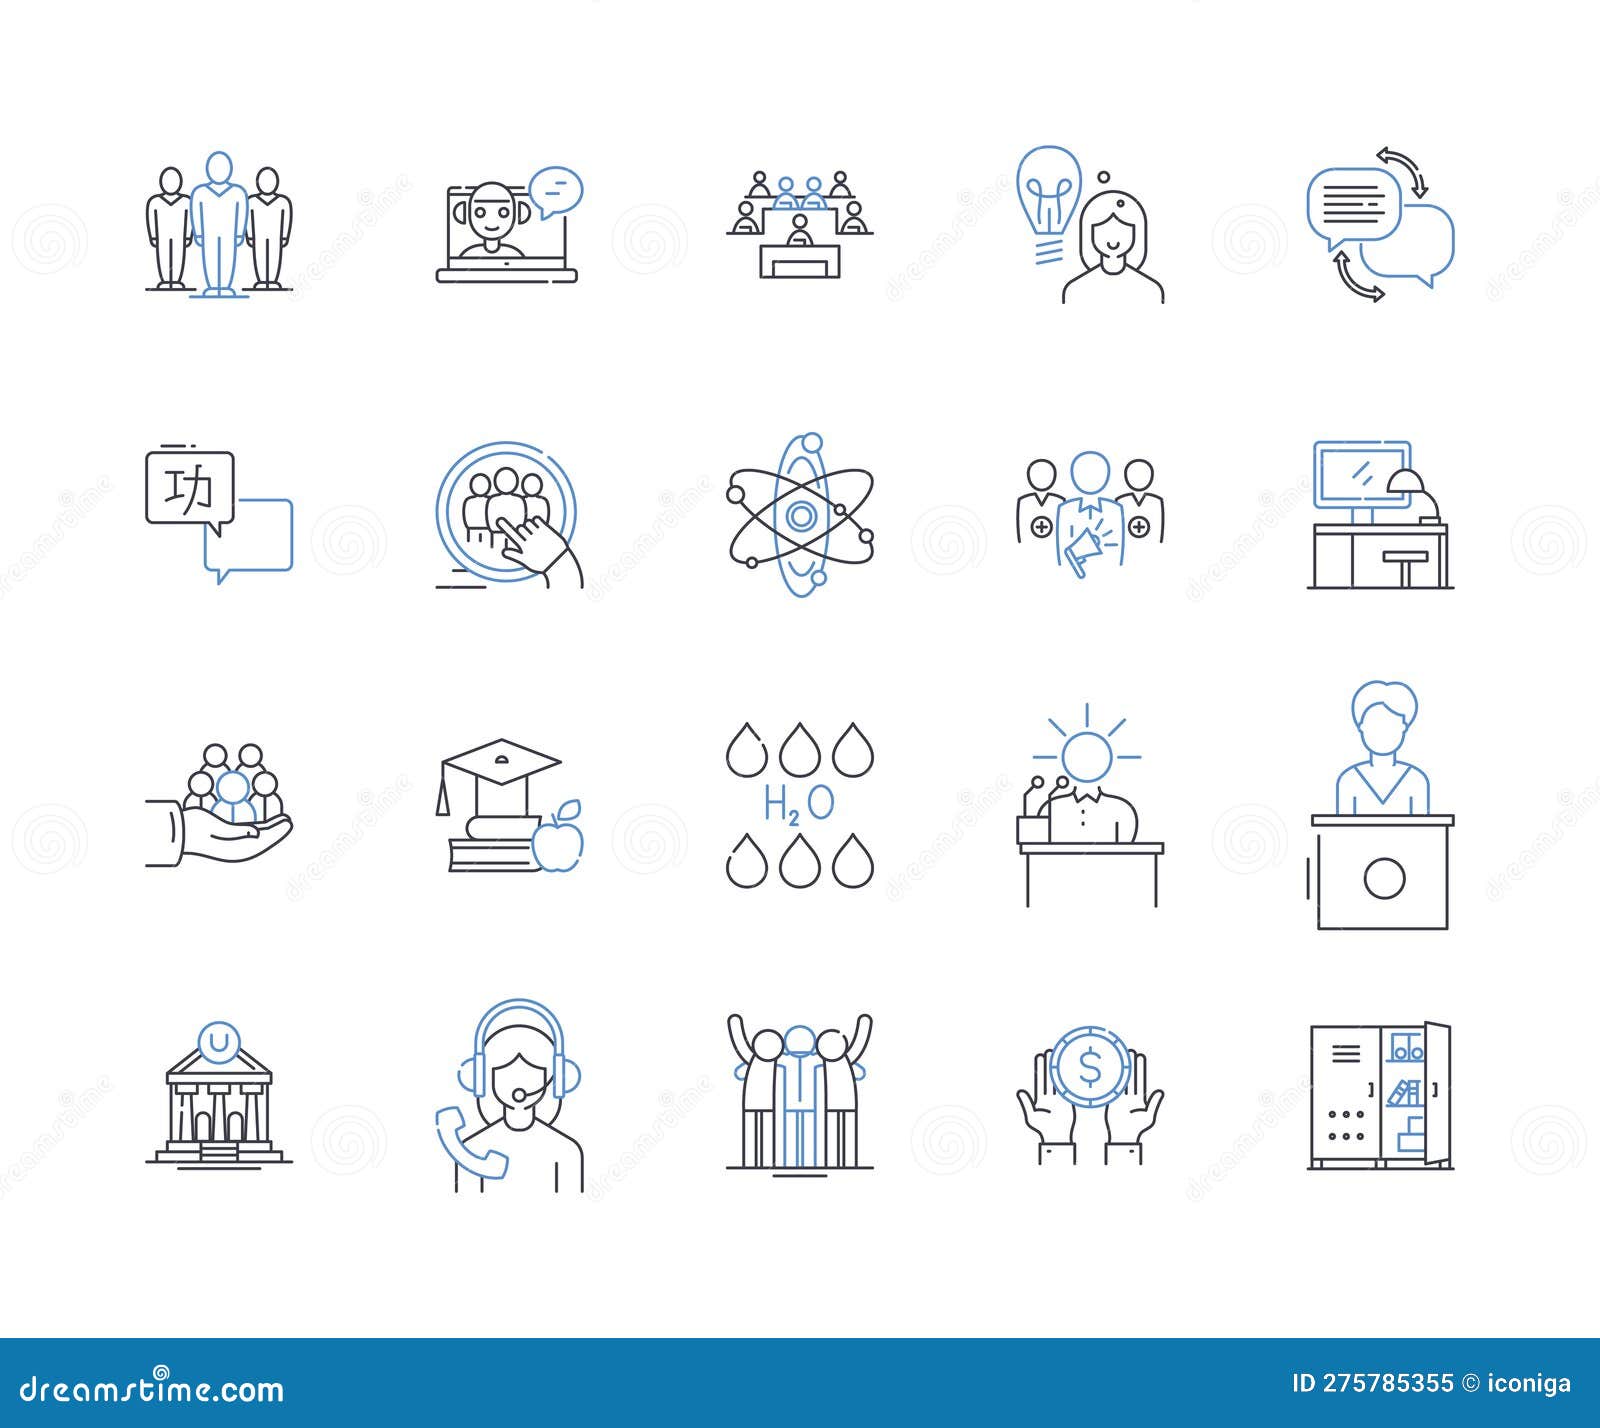 grasping ideas line icons collection. comprehend, capture, understand, interpret, grasp, absorb, conceptualize 